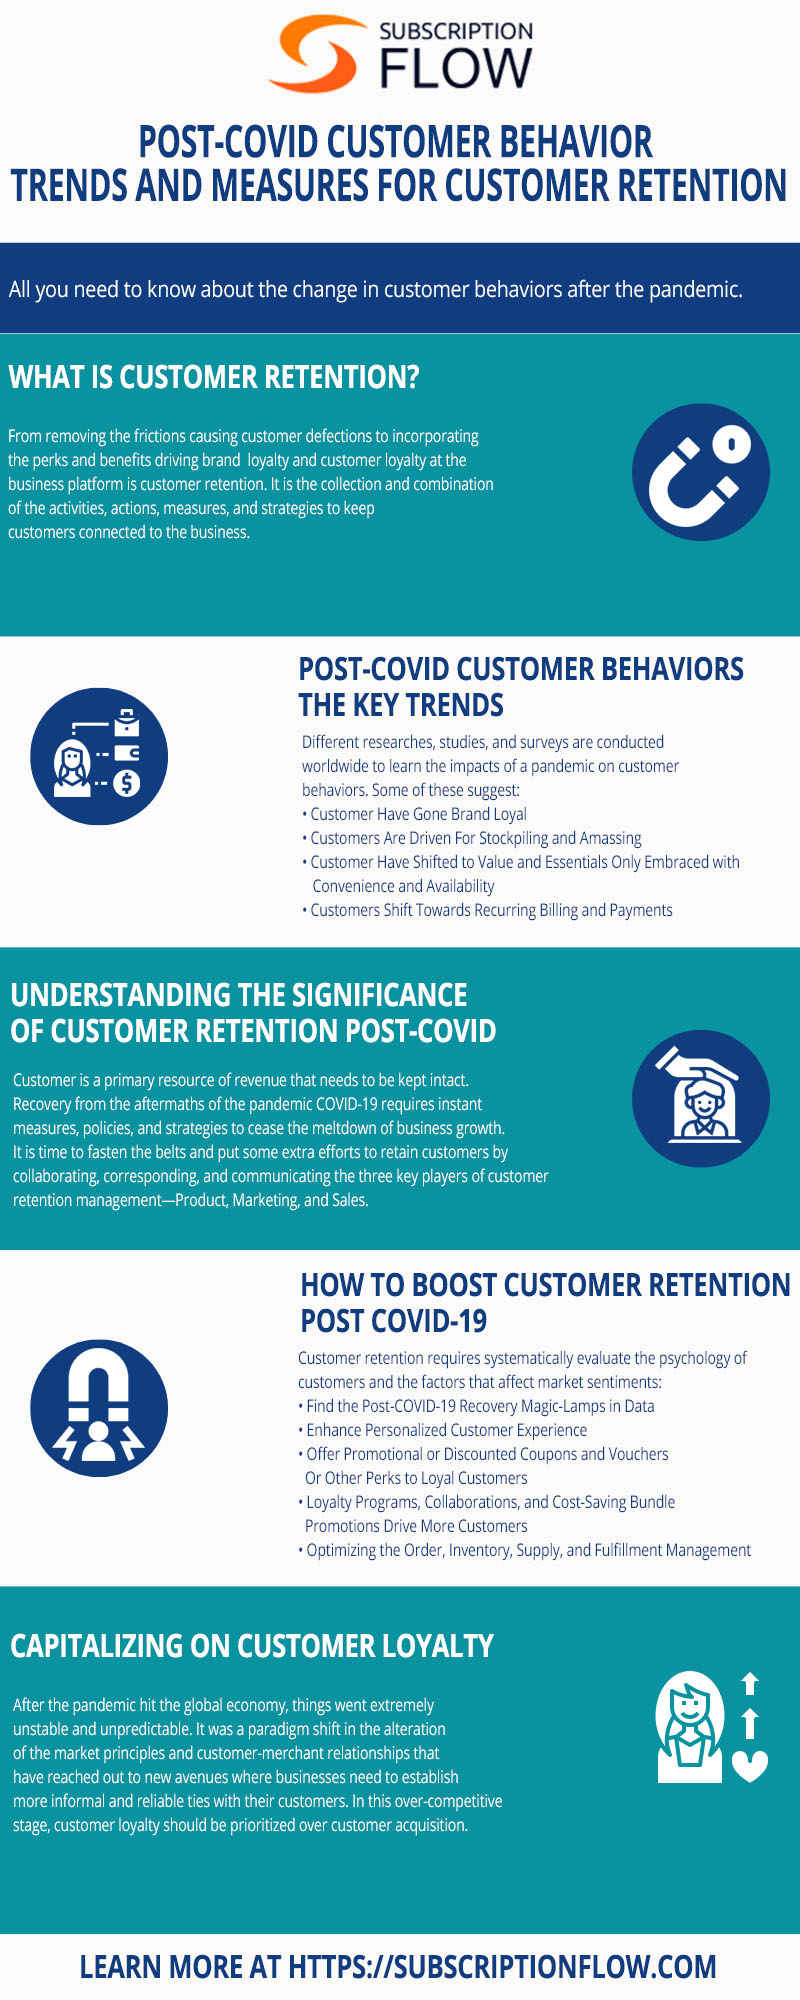 POST-COVID CUSTOMER BEHAVIOR TRENDS AND MEASURES FOR CUSTOMER RETENTION